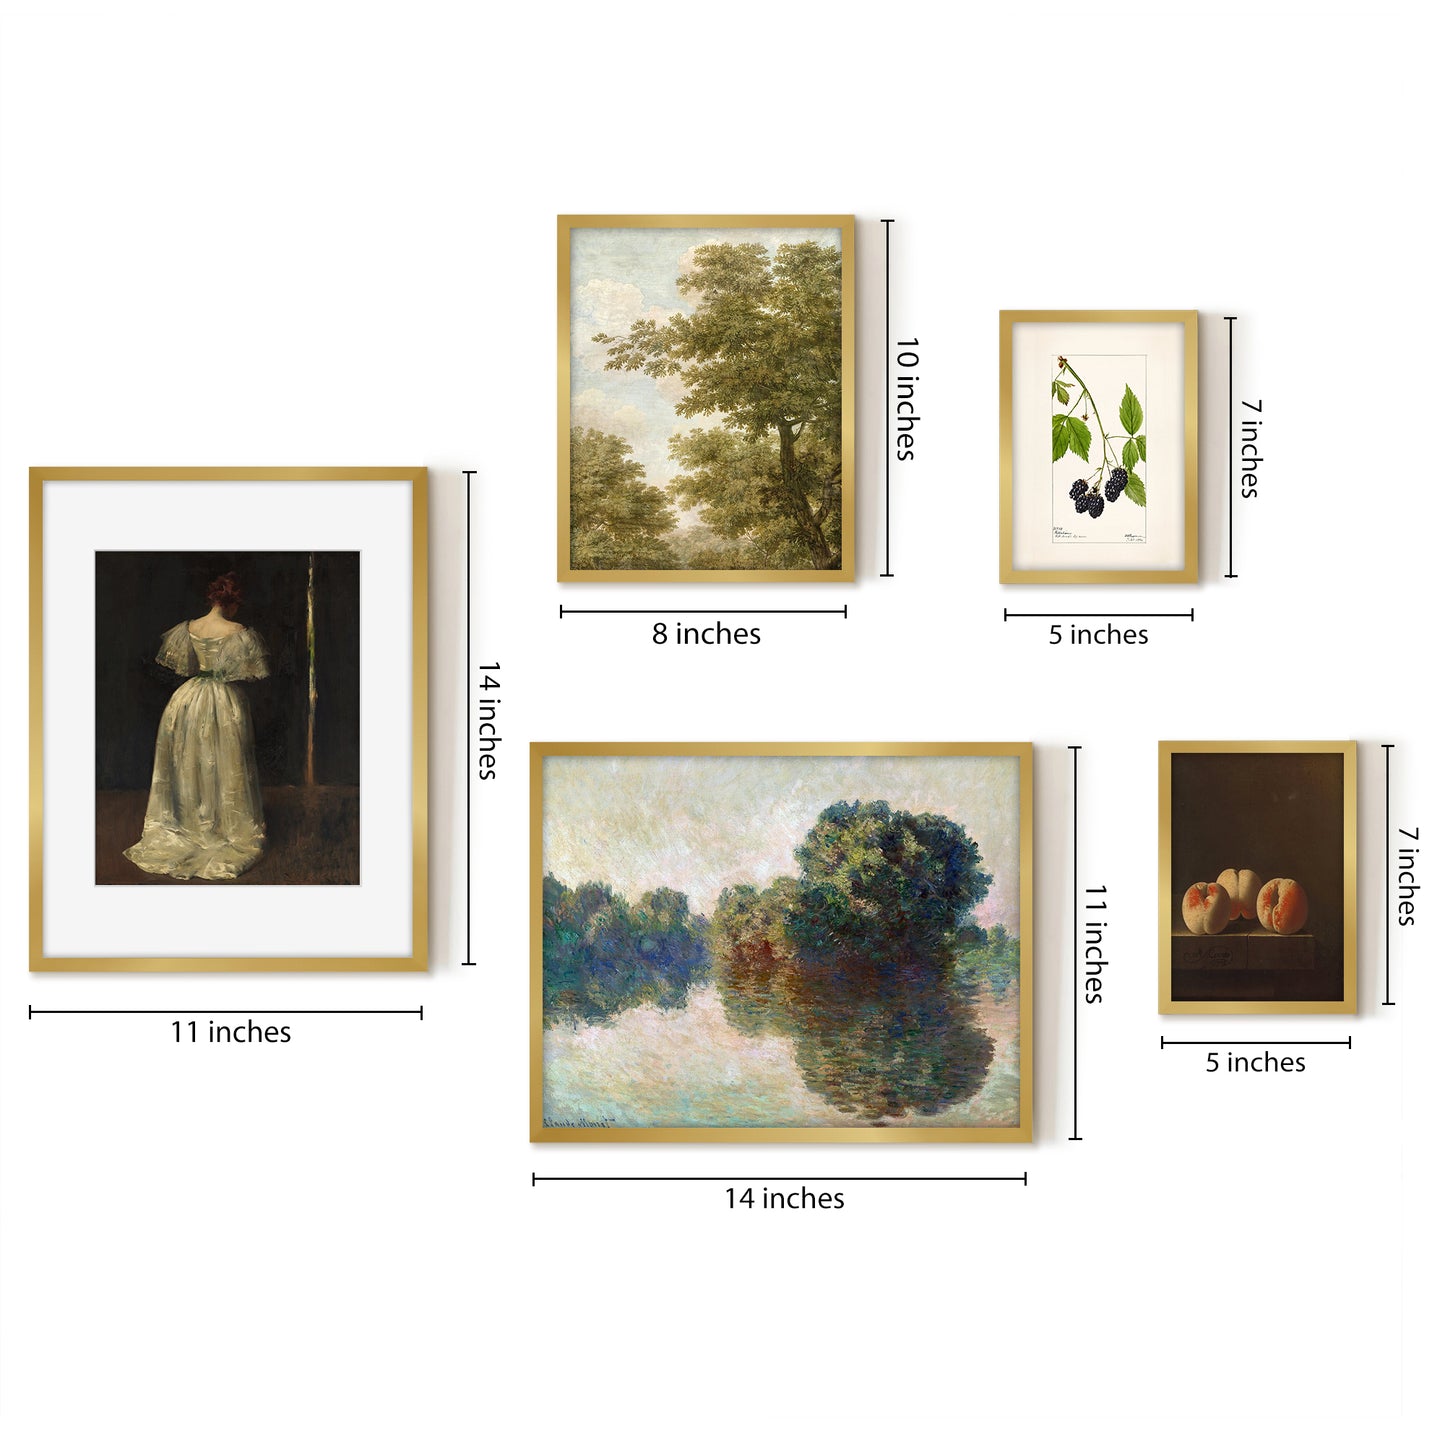 5 Piece Vintage Gallery Wall Art Set - Nature's Brushstrokes Art by Wall + Wonder